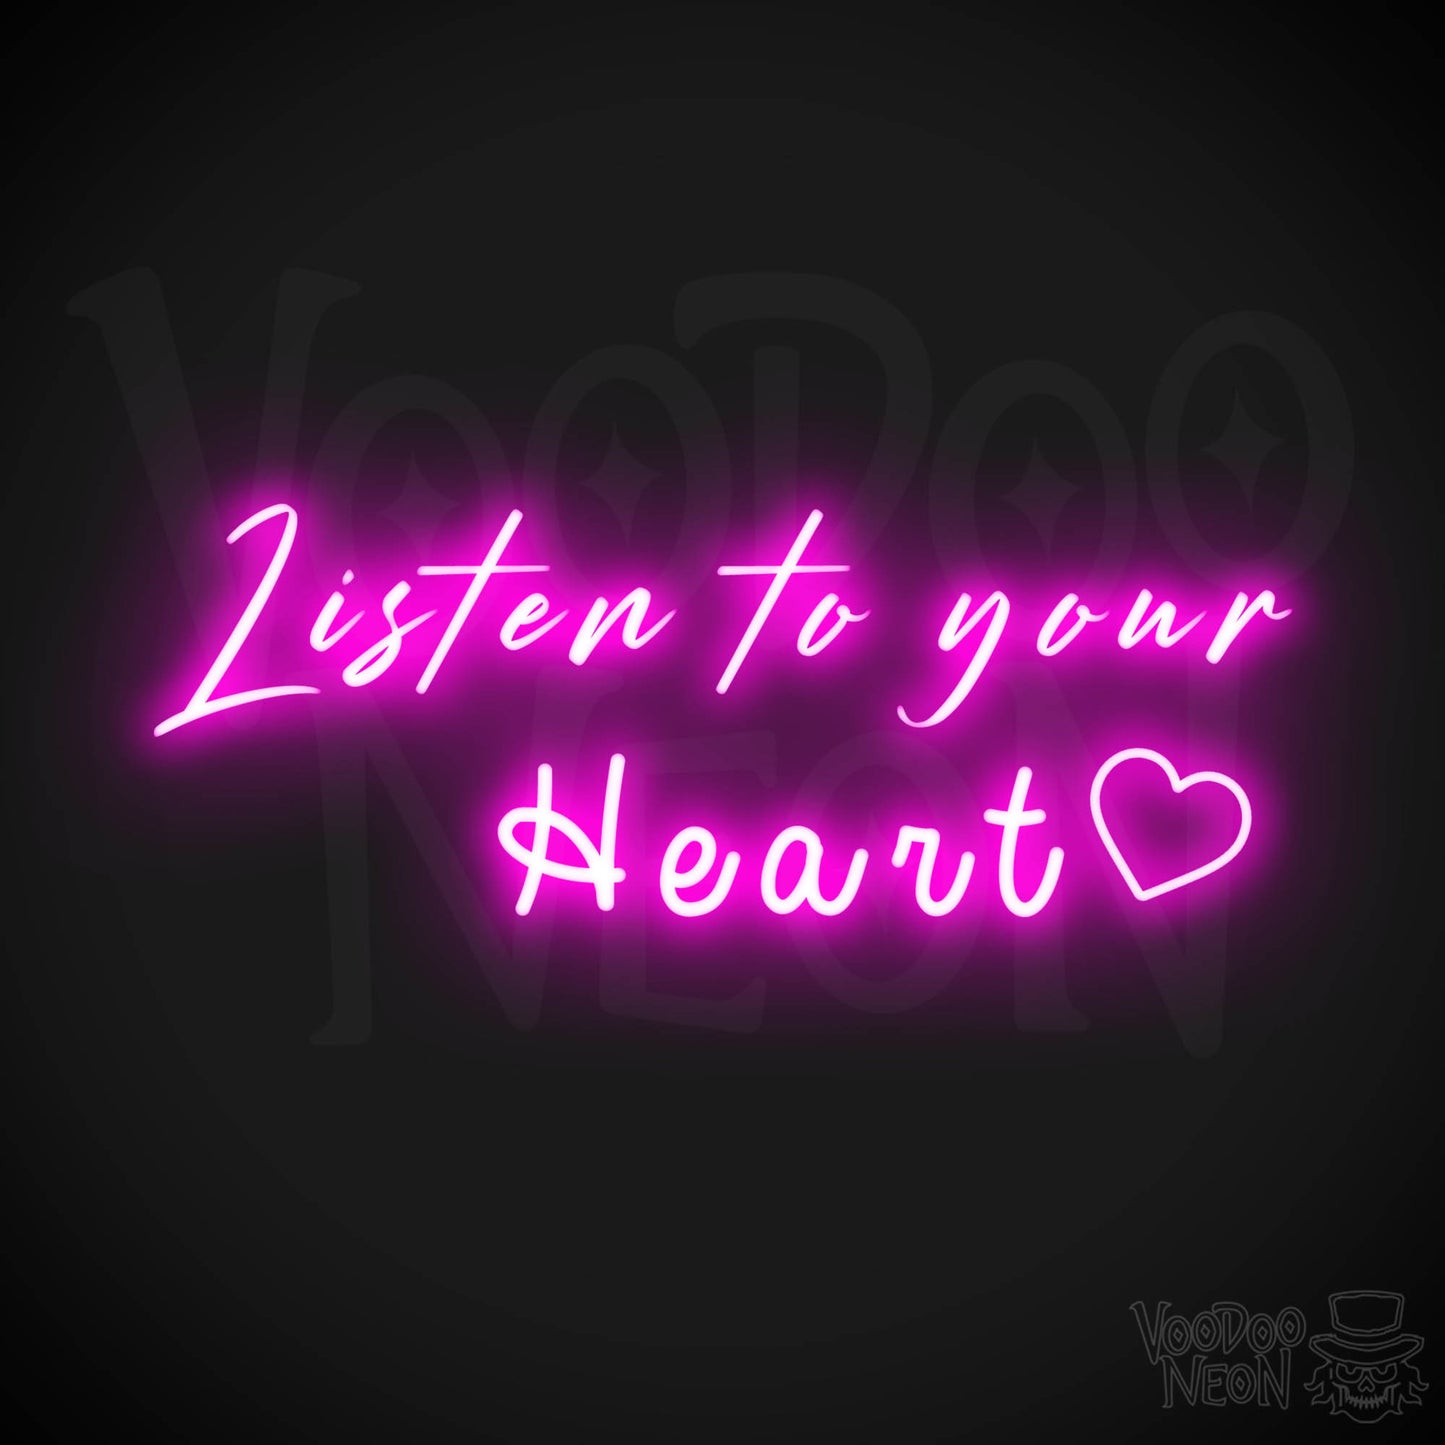 Listen To Your Heart Neon Sign - Neon Listen To Your Heart Sign - Wedding Sign - Color Pink